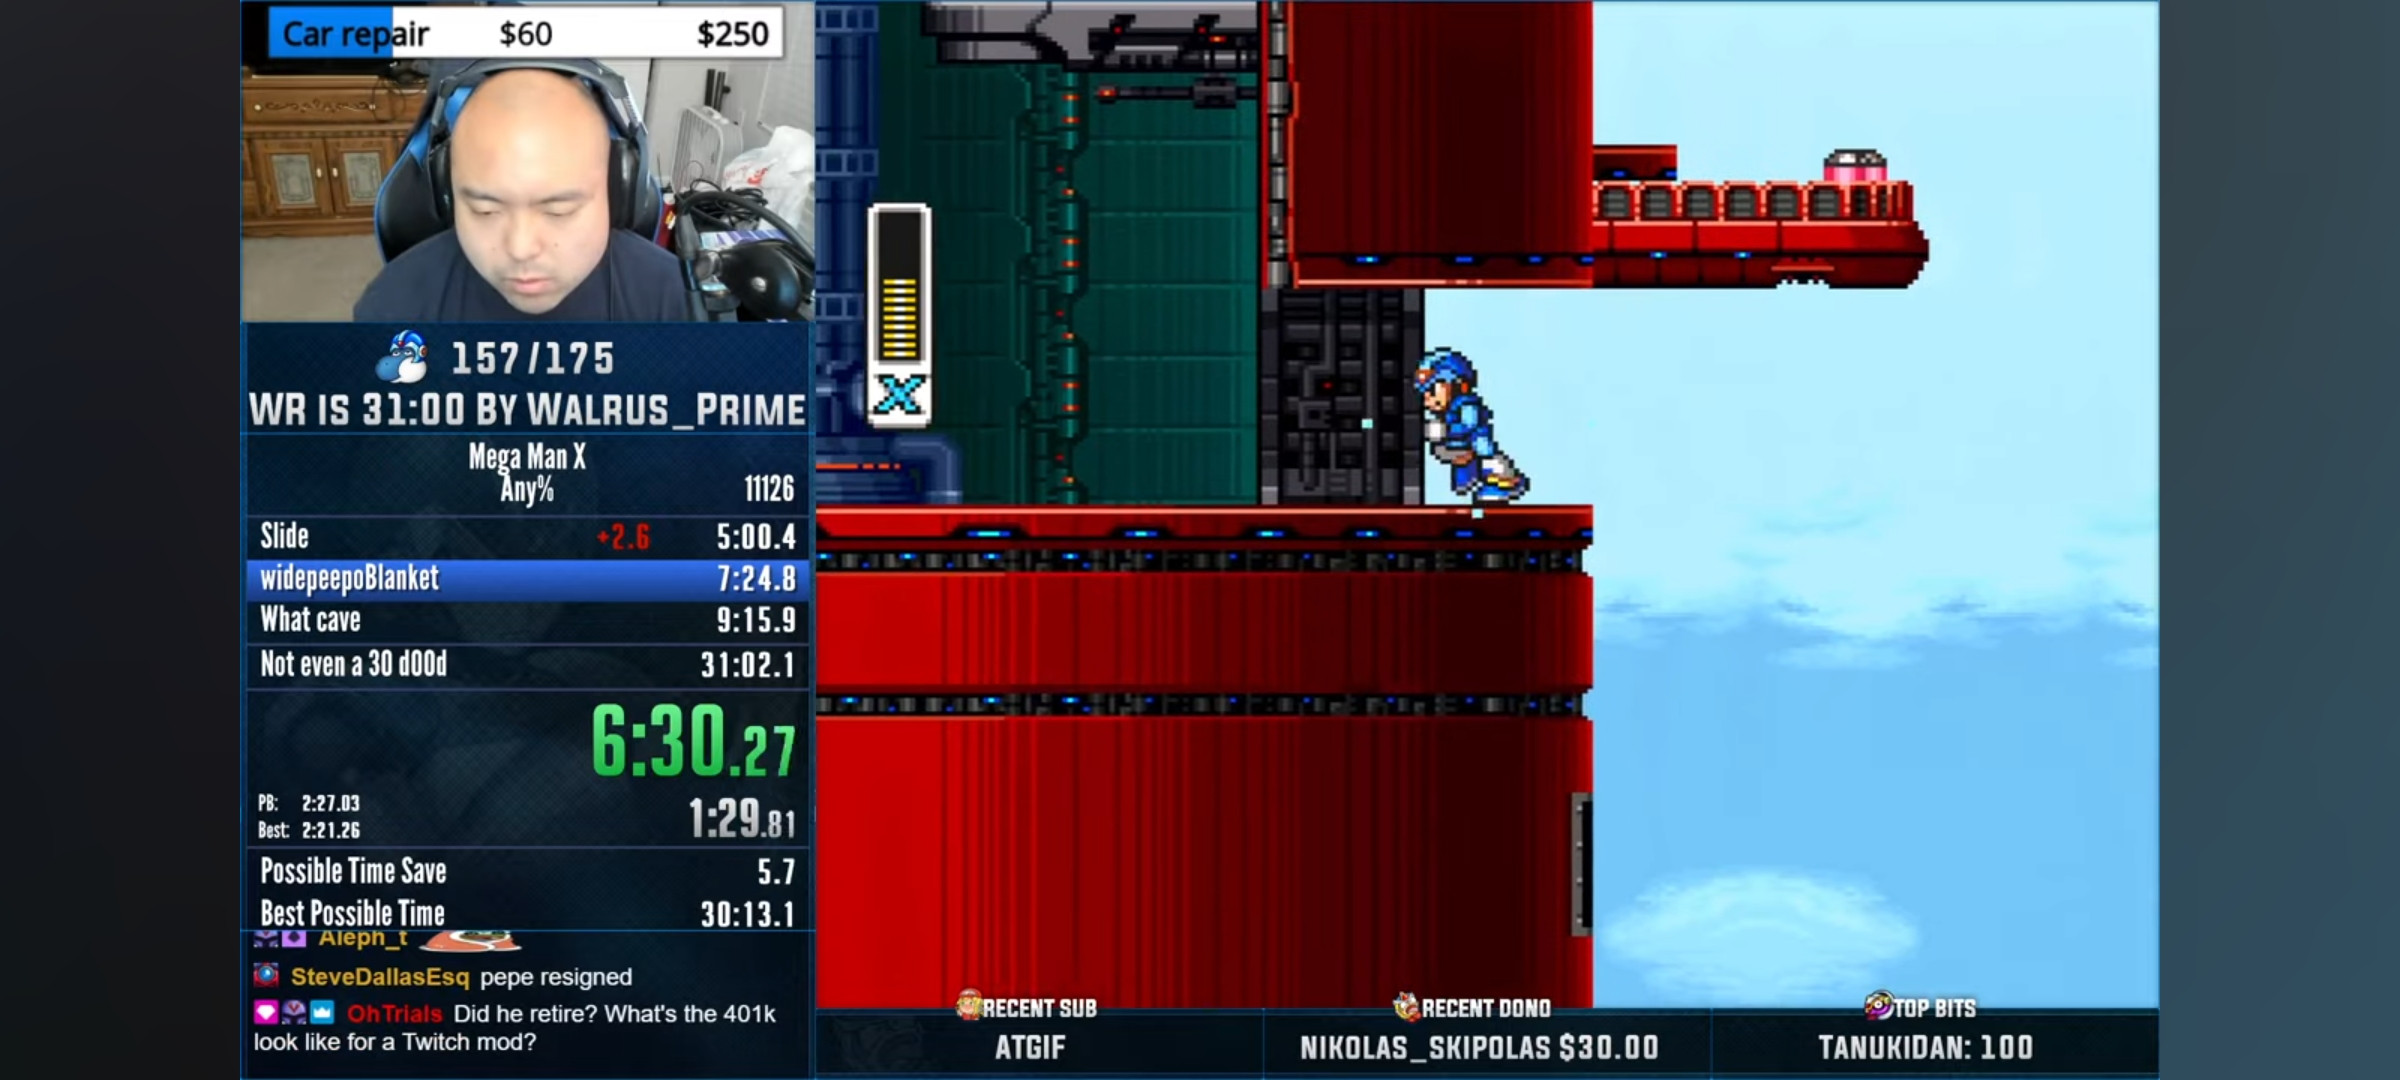 Whats the software used in Megaman X speedruns?